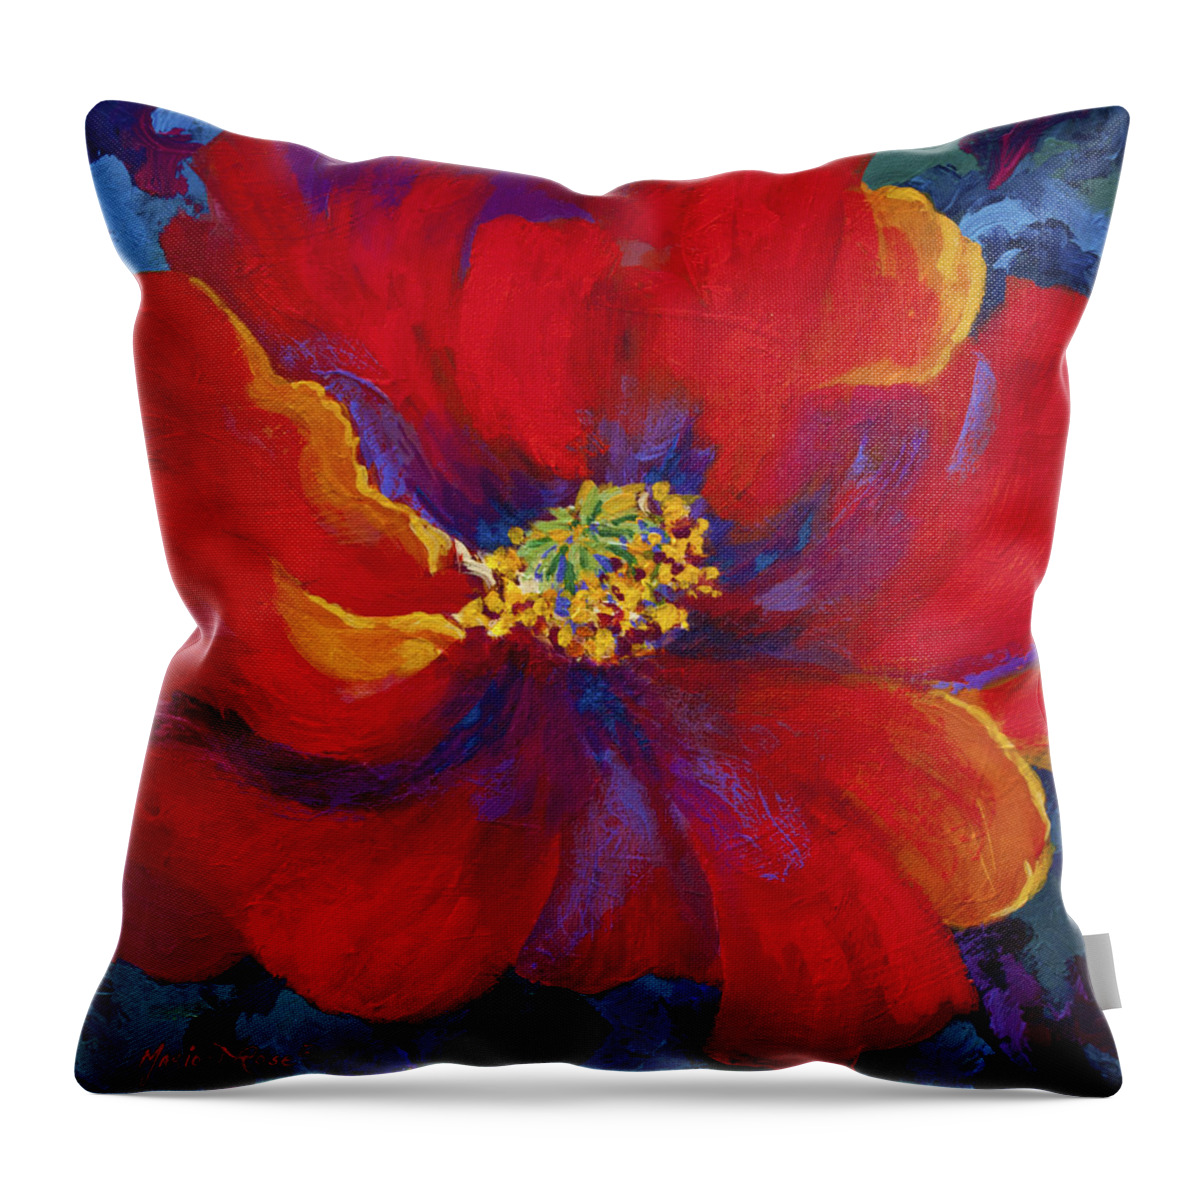 Flower Throw Pillow featuring the painting Passion - Red Poppy by Marion Rose